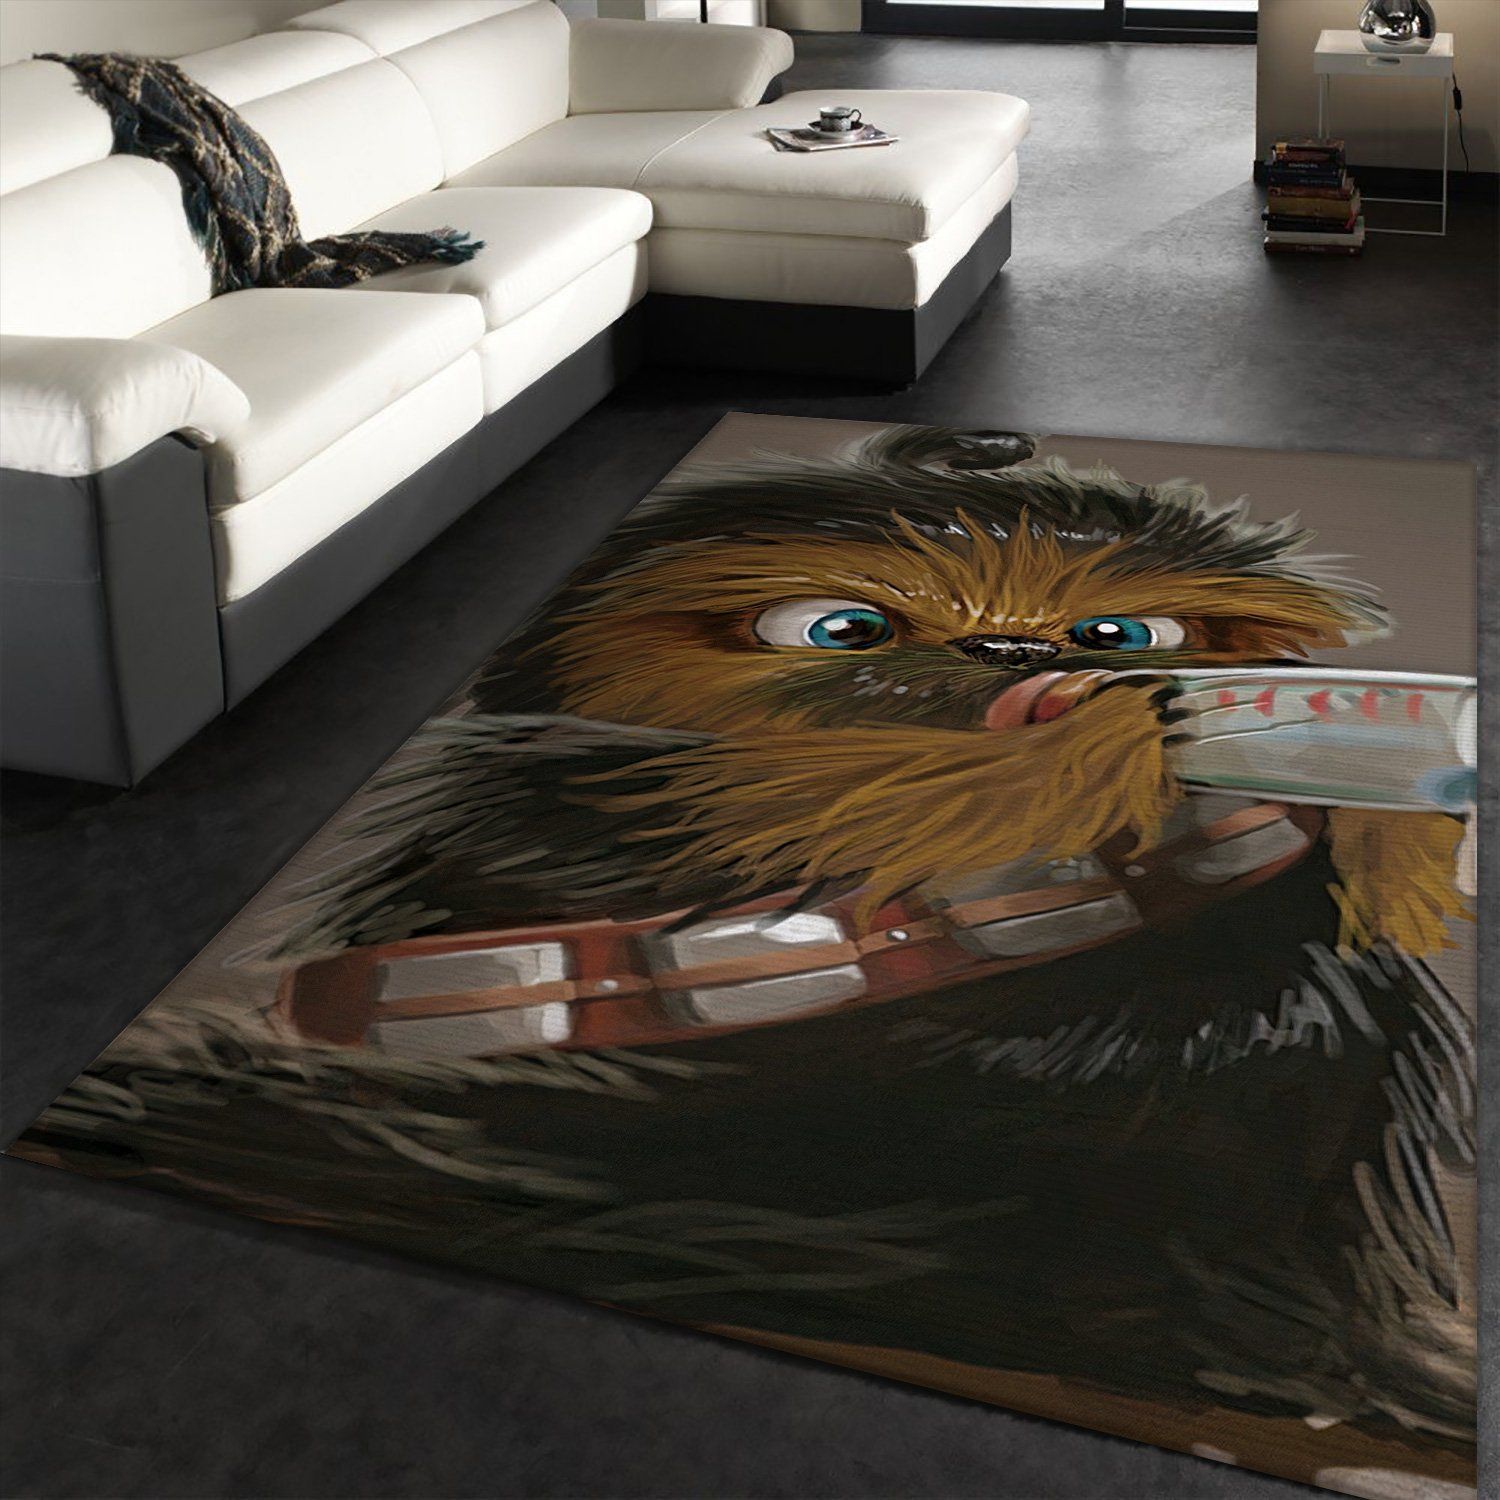 BABY CHEWBACCA STAR WARS MOVIES AREA RUGS LIVING ROOM CARPET FN2718022270222205 LOCAL BRANDS FLOOR DECOR THE US DECOR 18022270222